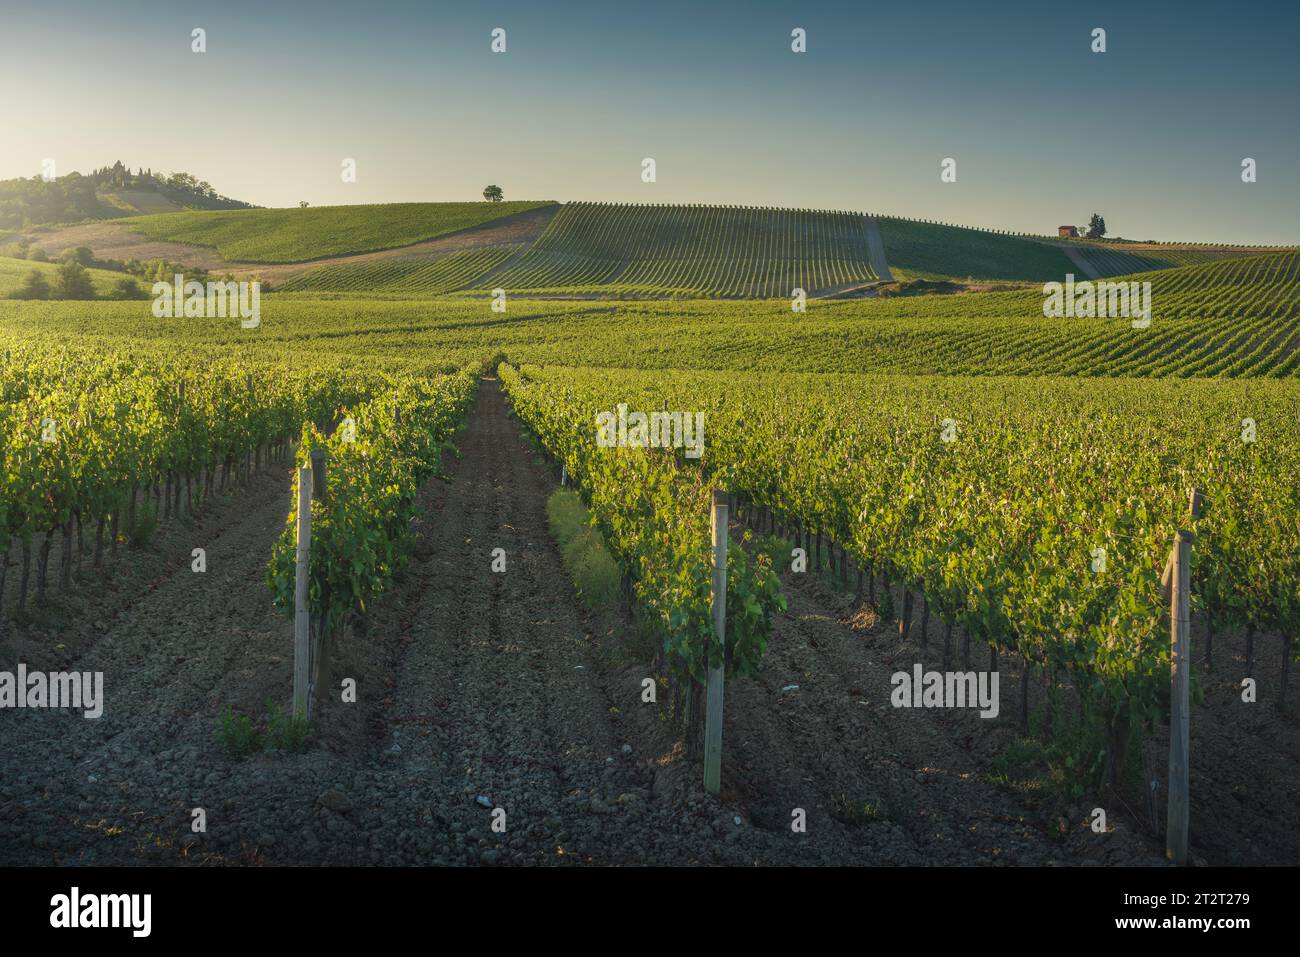 Vineyards at sunset. Trees on the top of the hill. Castellina in Chianti, Tuscany region, Italy, Europe. Stock Photo